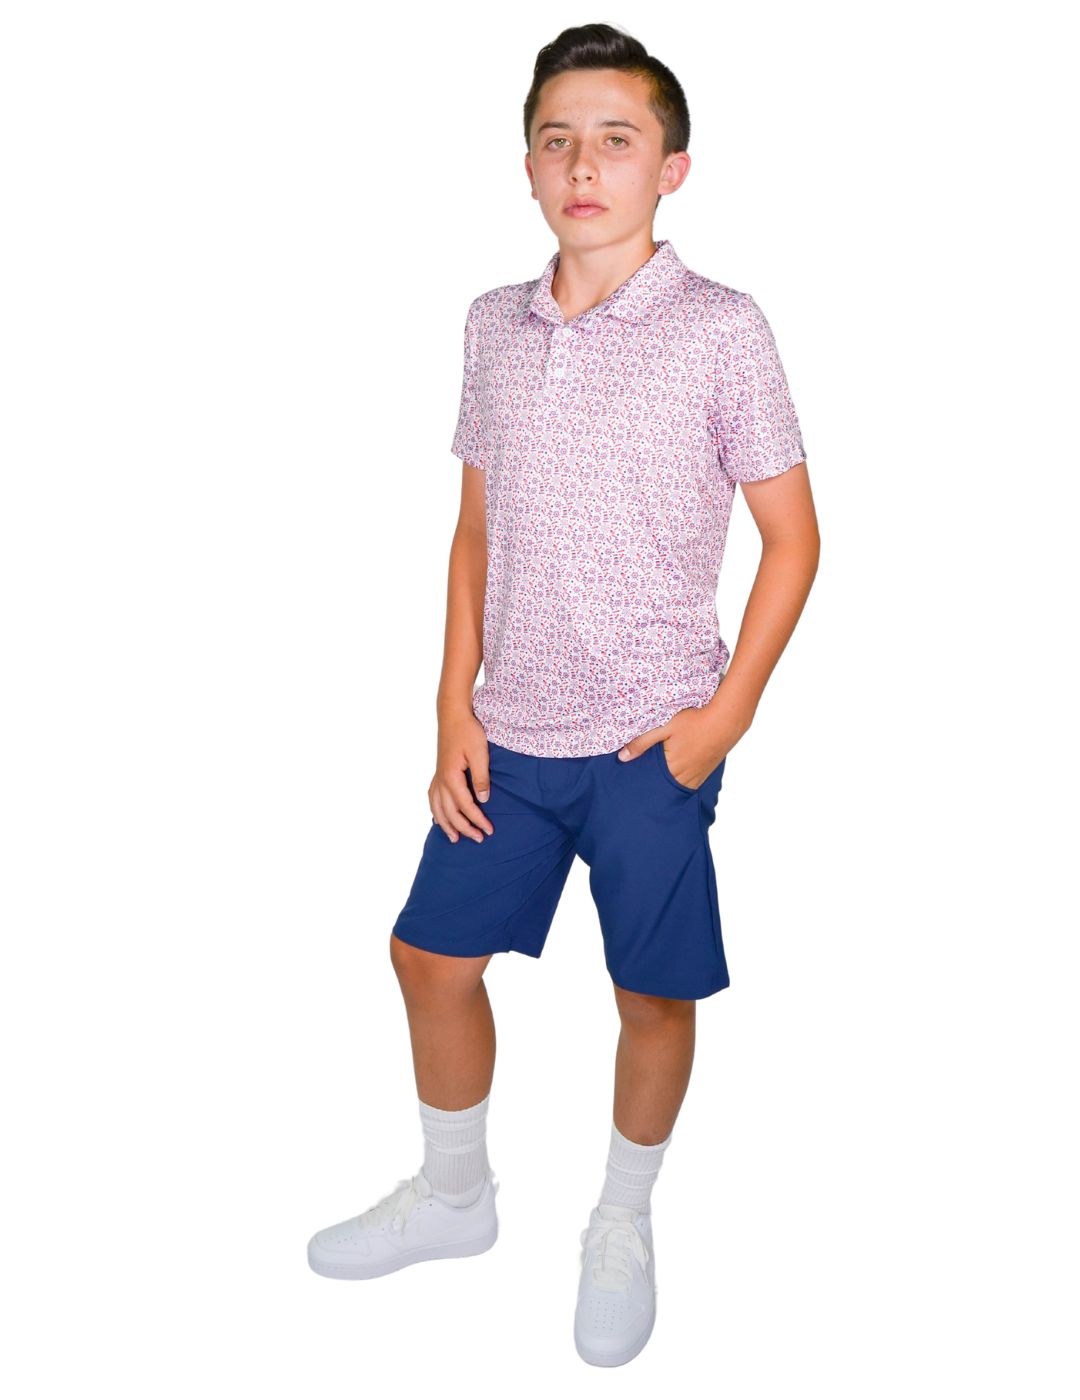 Limited Edition Uncle Sam Youth Boys' Polo